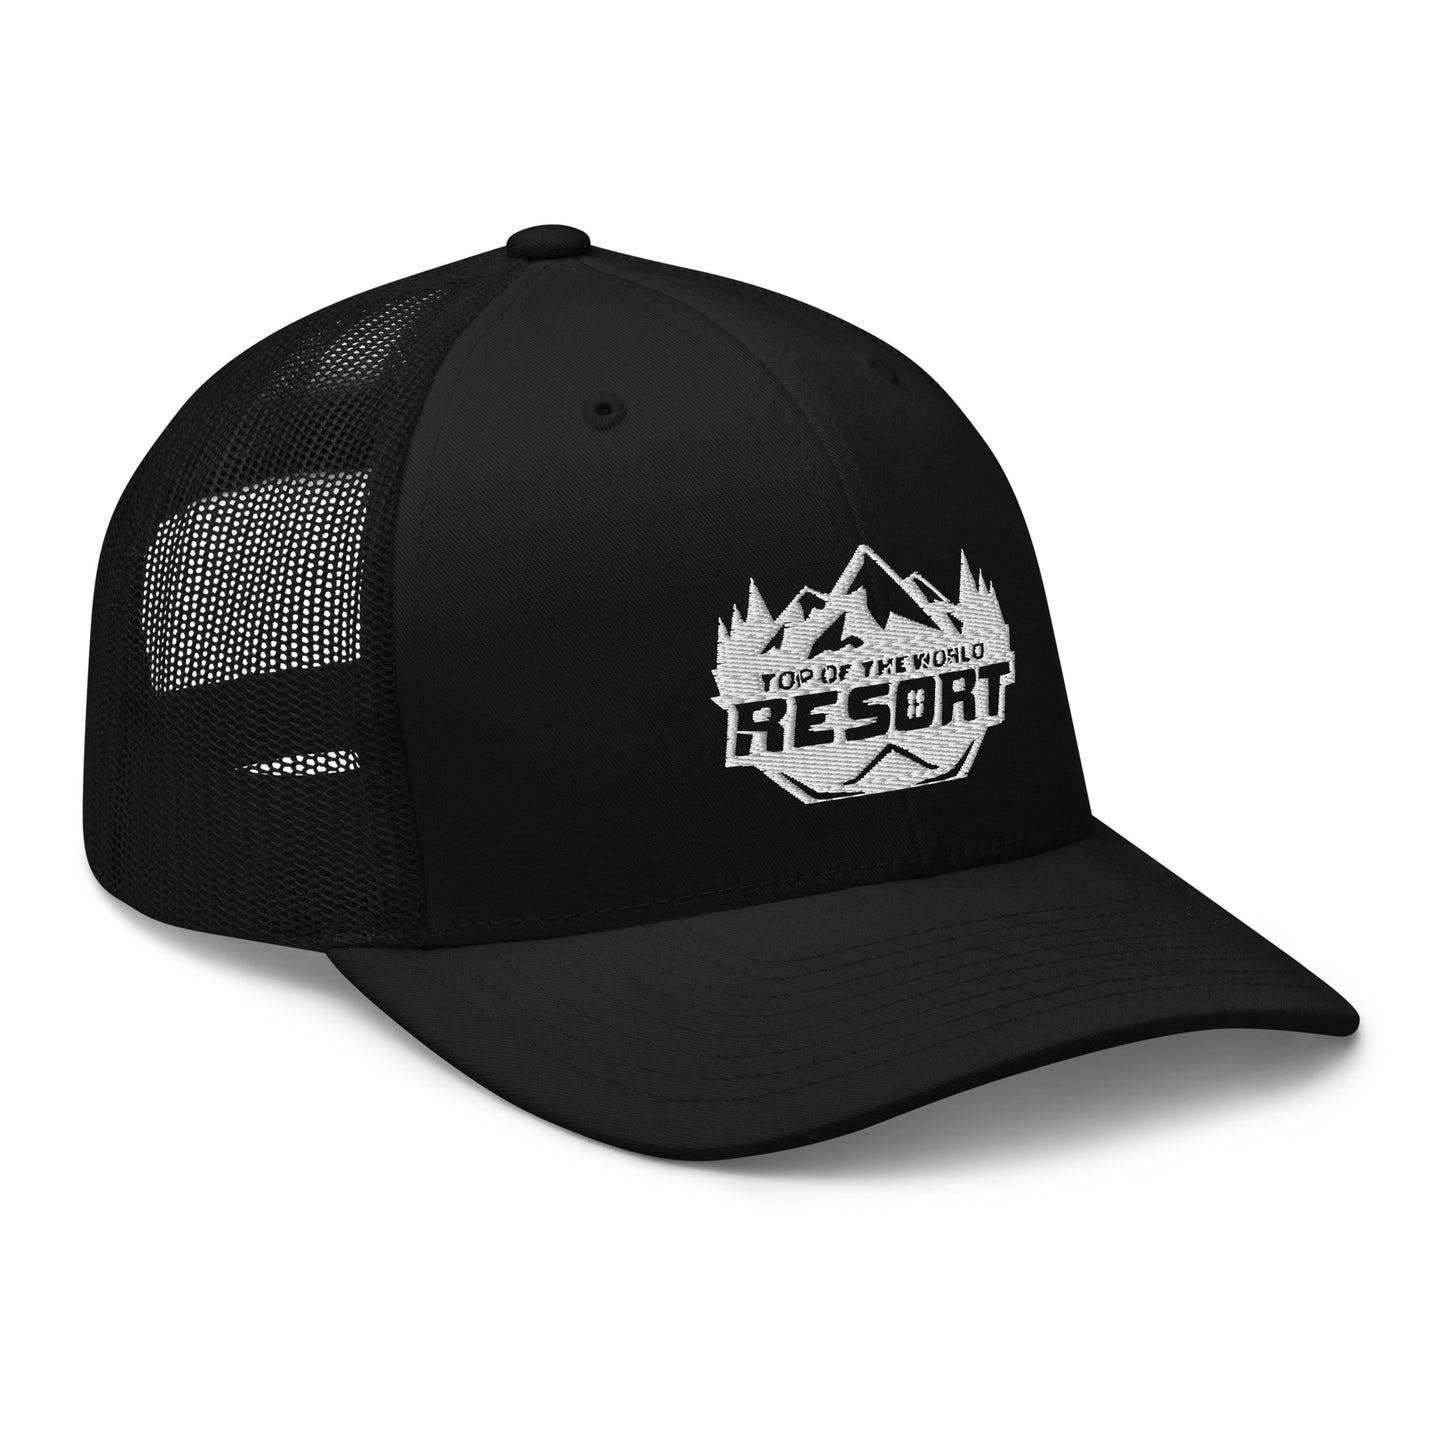 Top of the World Cap